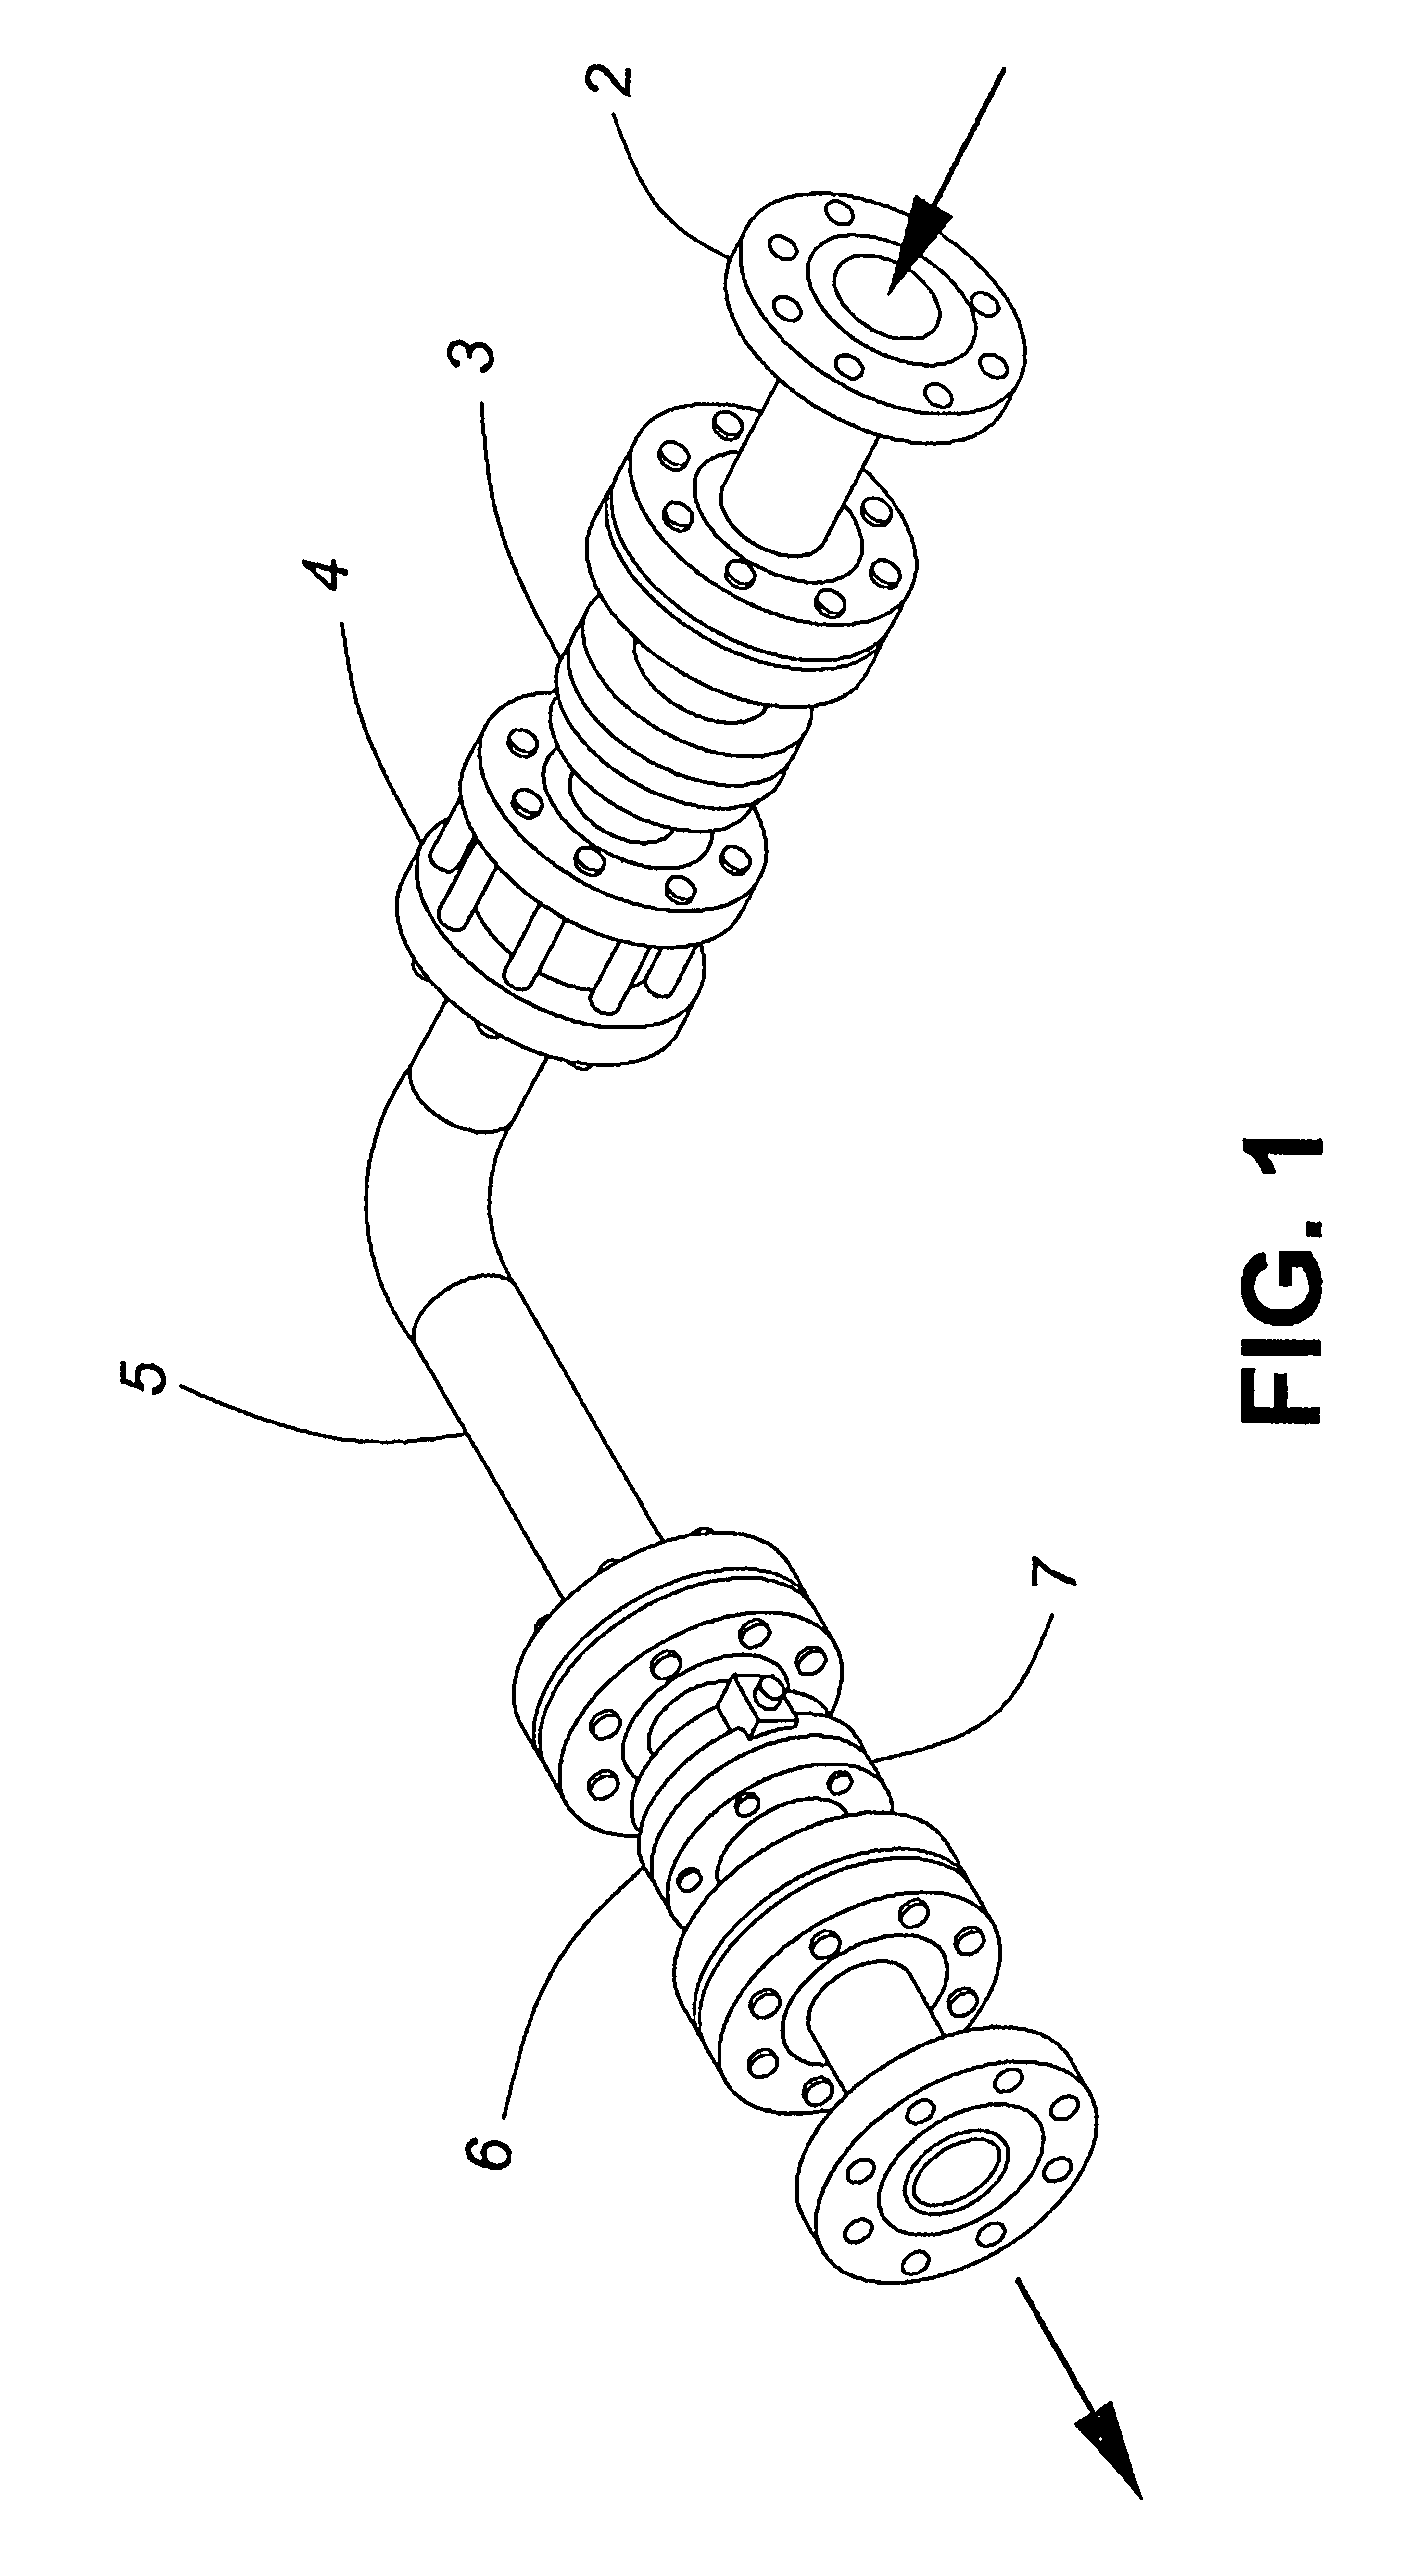 Natural gas compressor and a system for operating the same